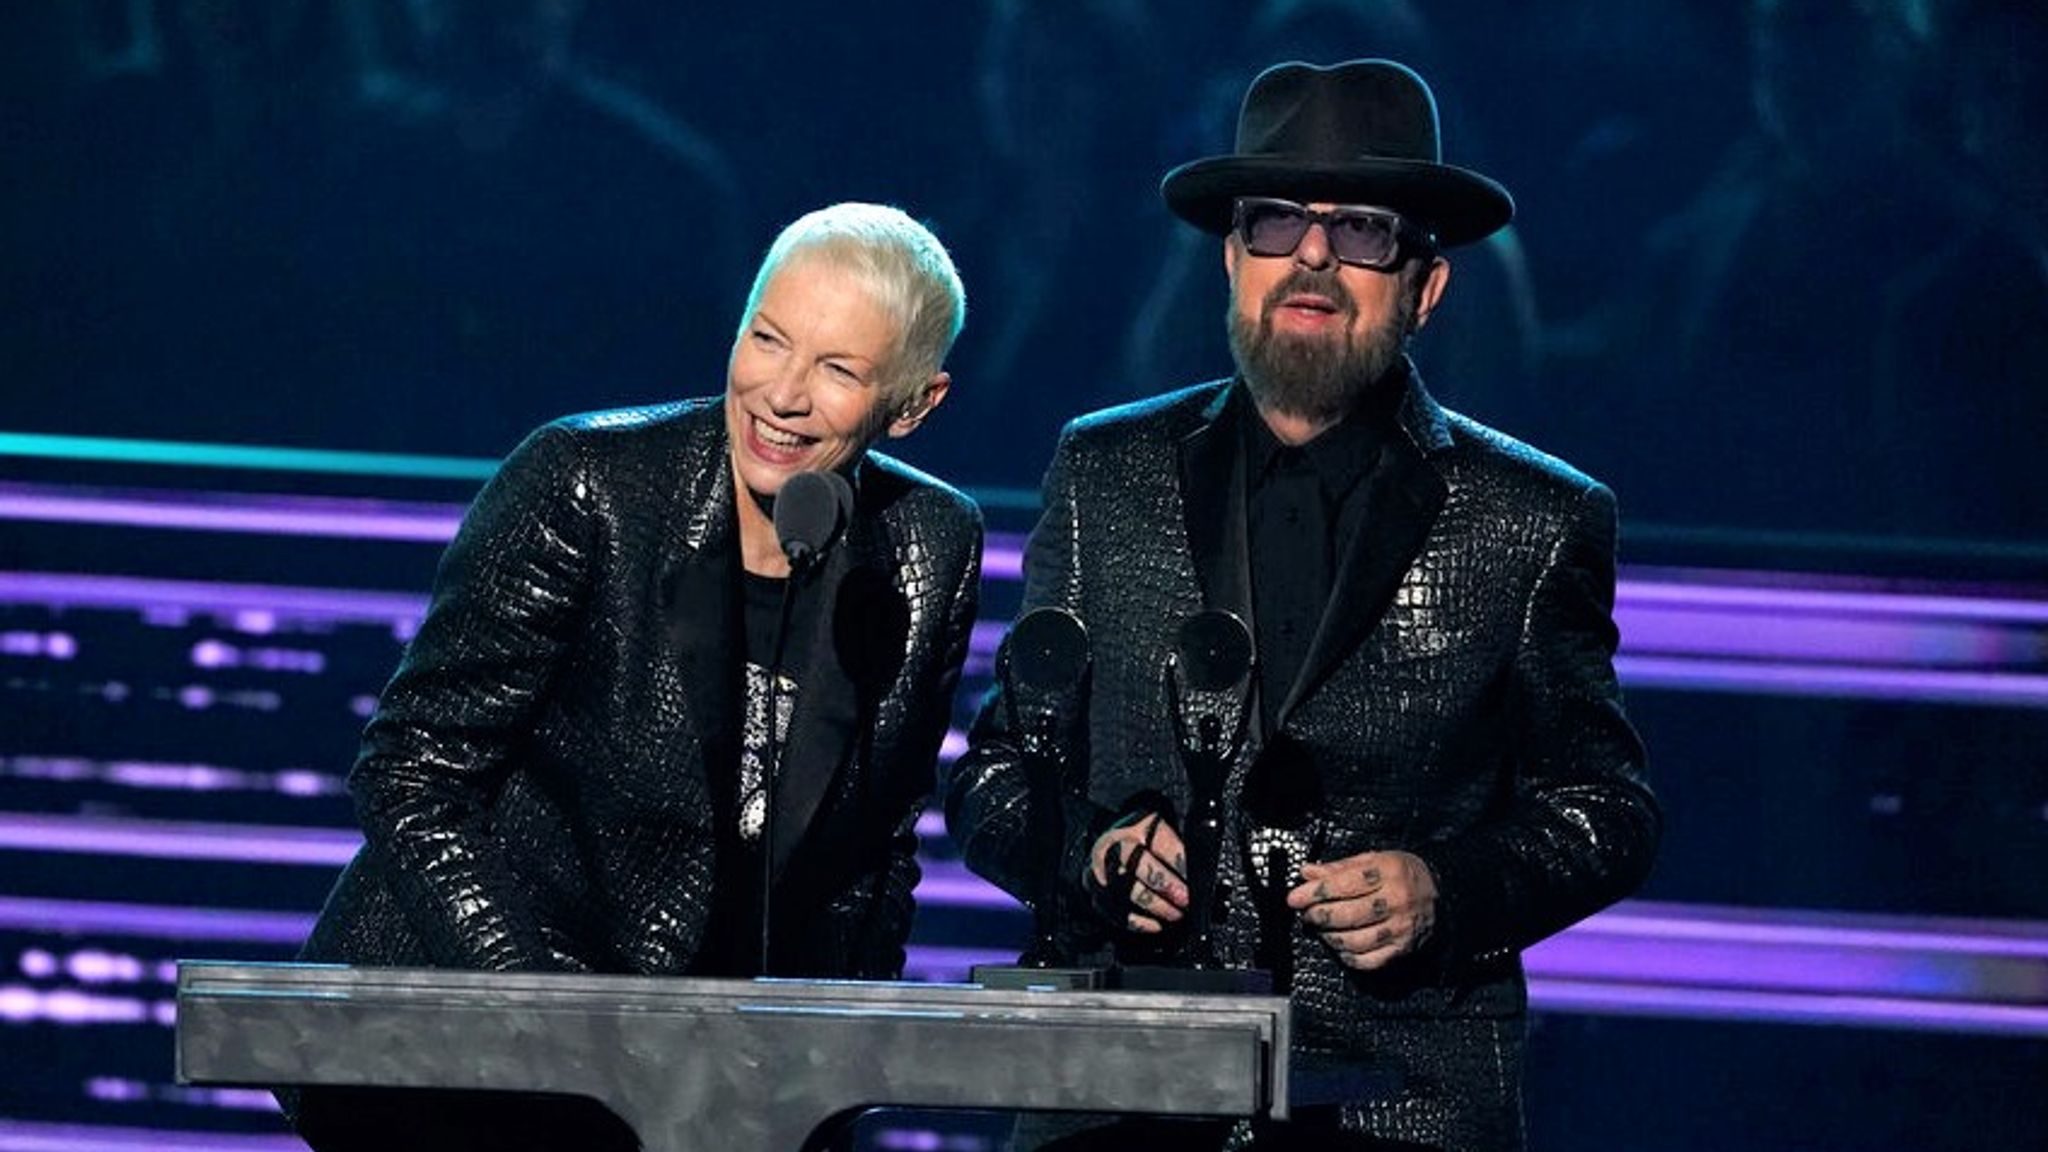 Inductees Annie Lennox, left, and Dave Stewart of Eurythmics speak during the Rock & Roll Hall of Fame Induction Ceremony on Saturday, Nov. 5, 2022. Pic: AP/Chris Pizzello